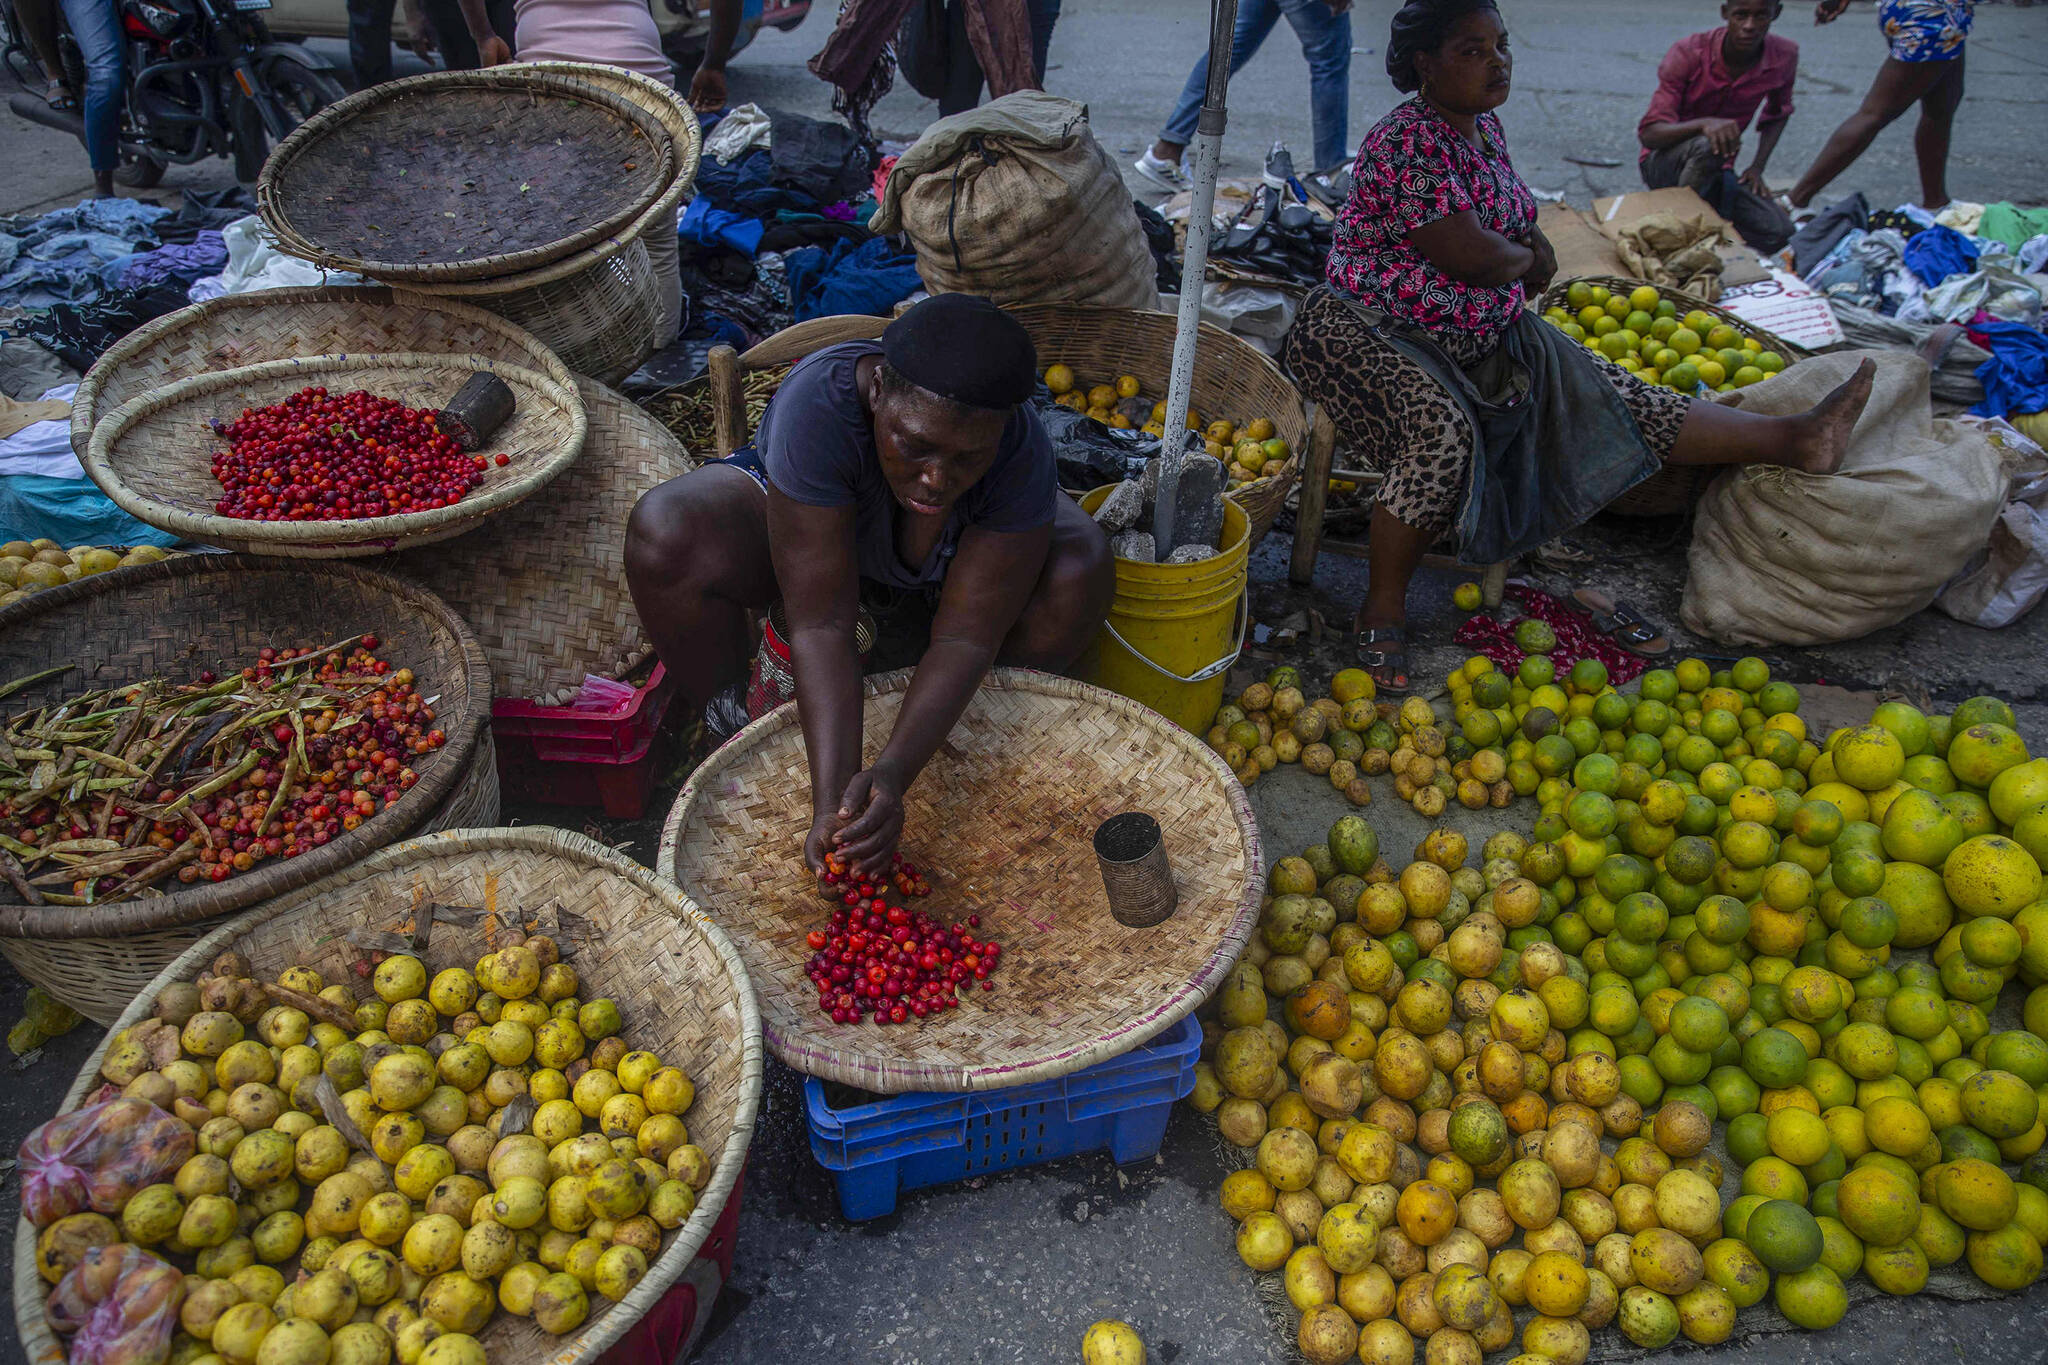 A street vendor prepares her produce for sale in Port-au-Prince, Haiti, Sunday, Oct. 17, 2021. A group of 17 U.S. missionaries including children was kidnapped by a gang in Haiti on Saturday, Oct. 16, according to a voice message sent to various religious missions by an organization with direct knowledge of the incident. (AP Photo / Joseph Odelyn)